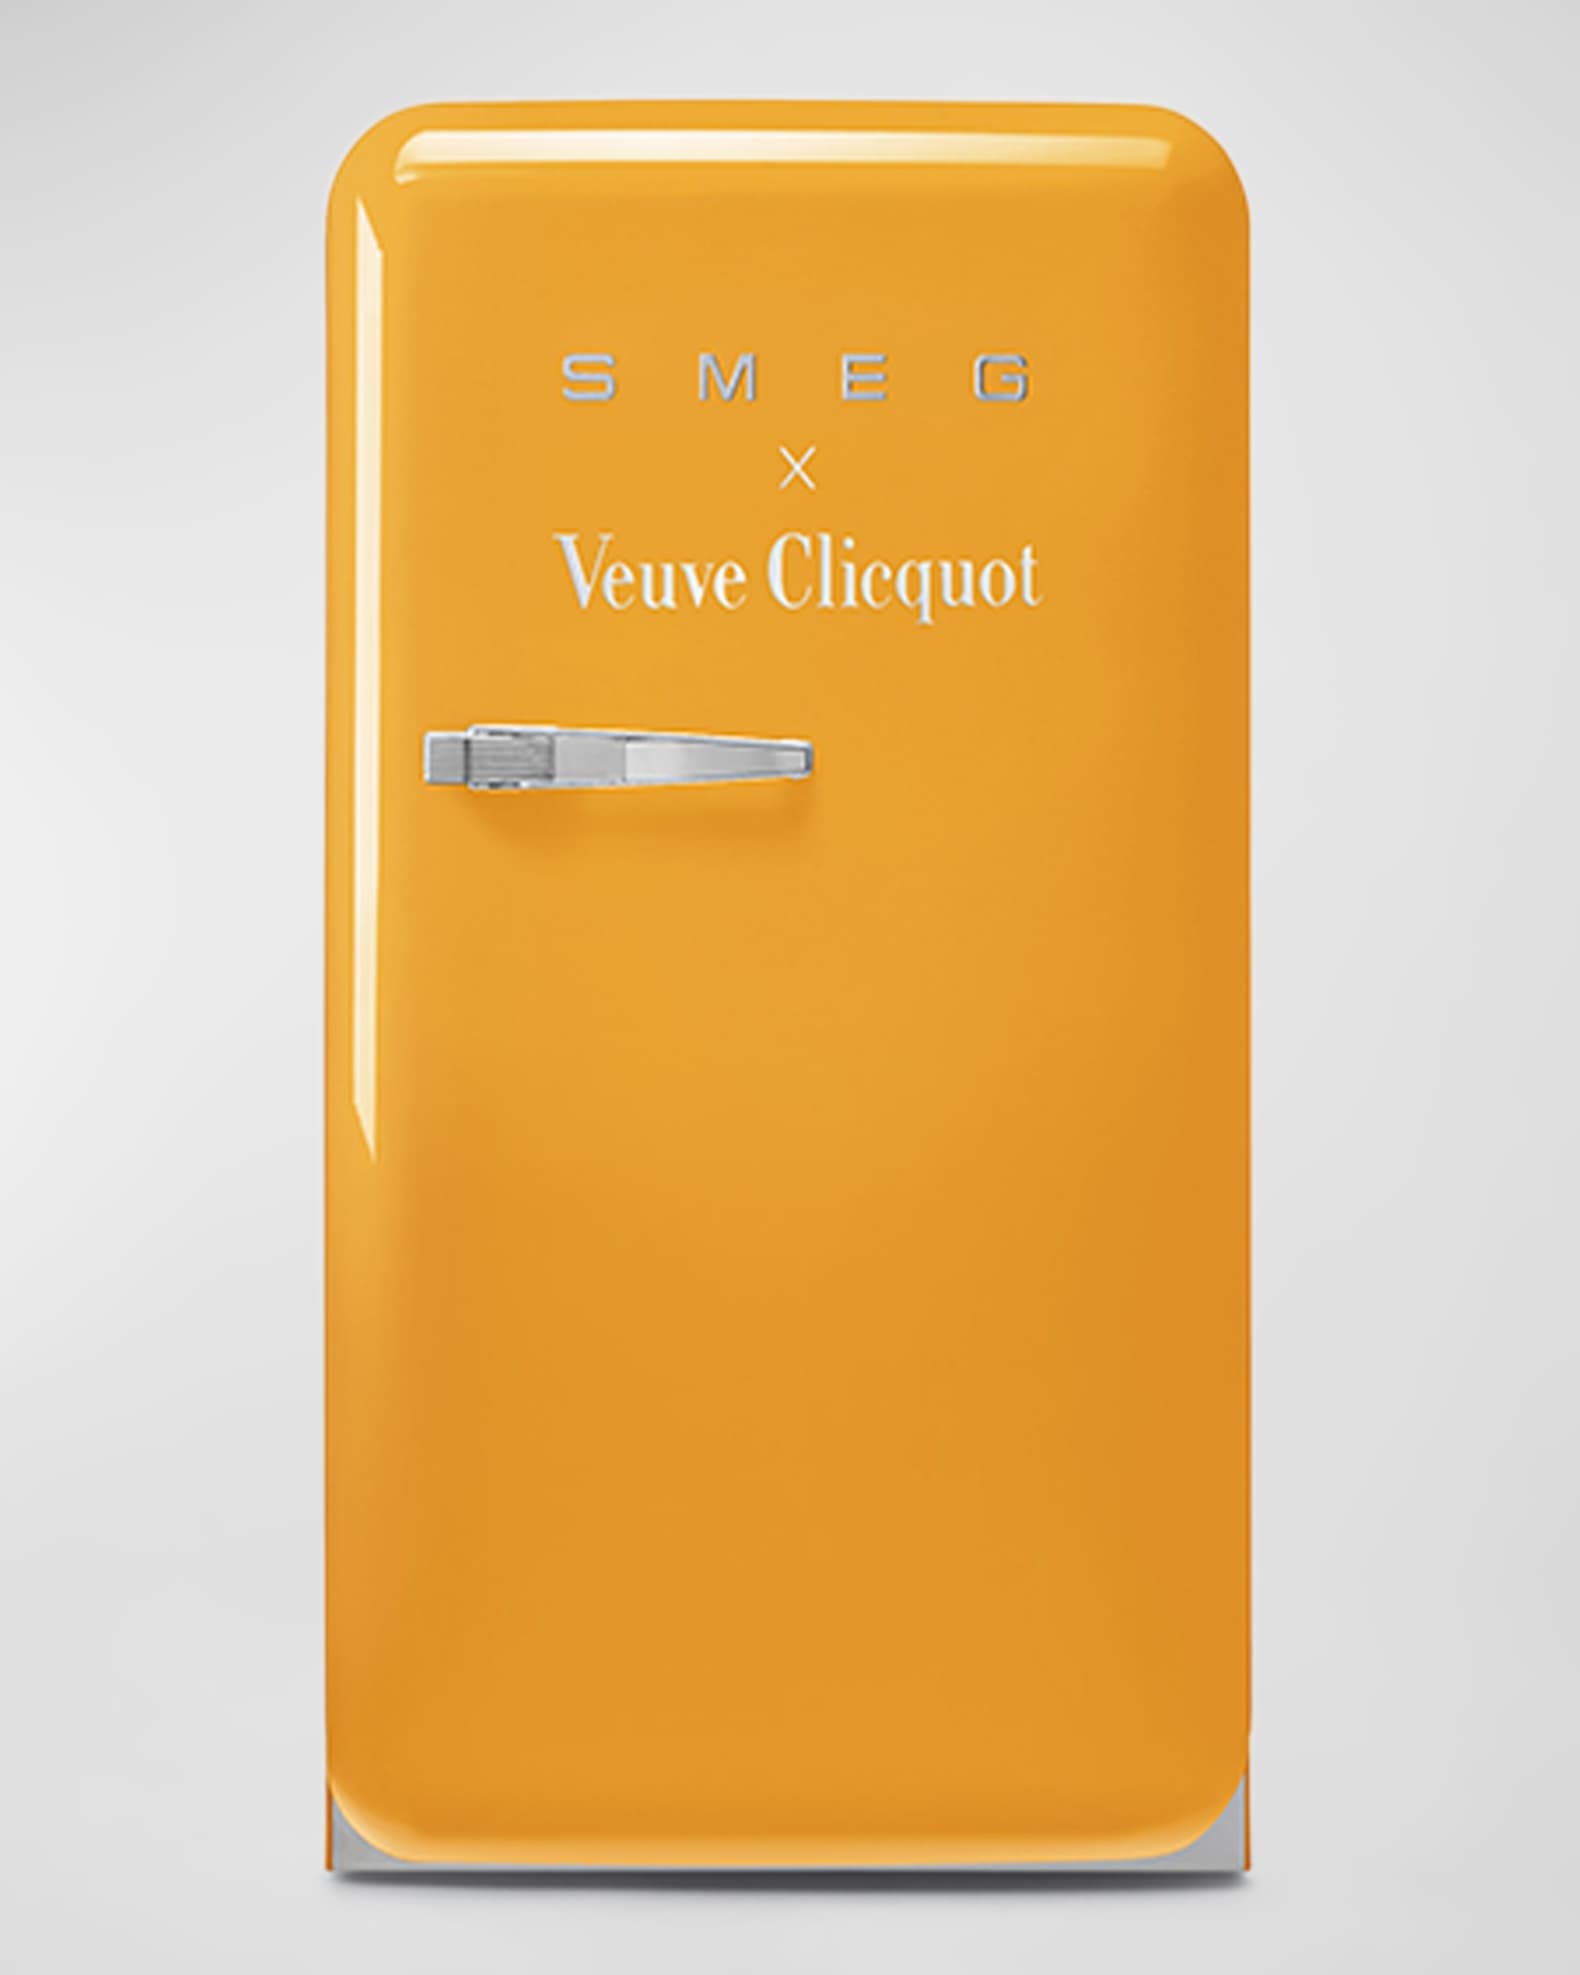 Smeg Has Collaborated With Veuve Clicquot on a Limited-Edition Fridge –  Robb Report